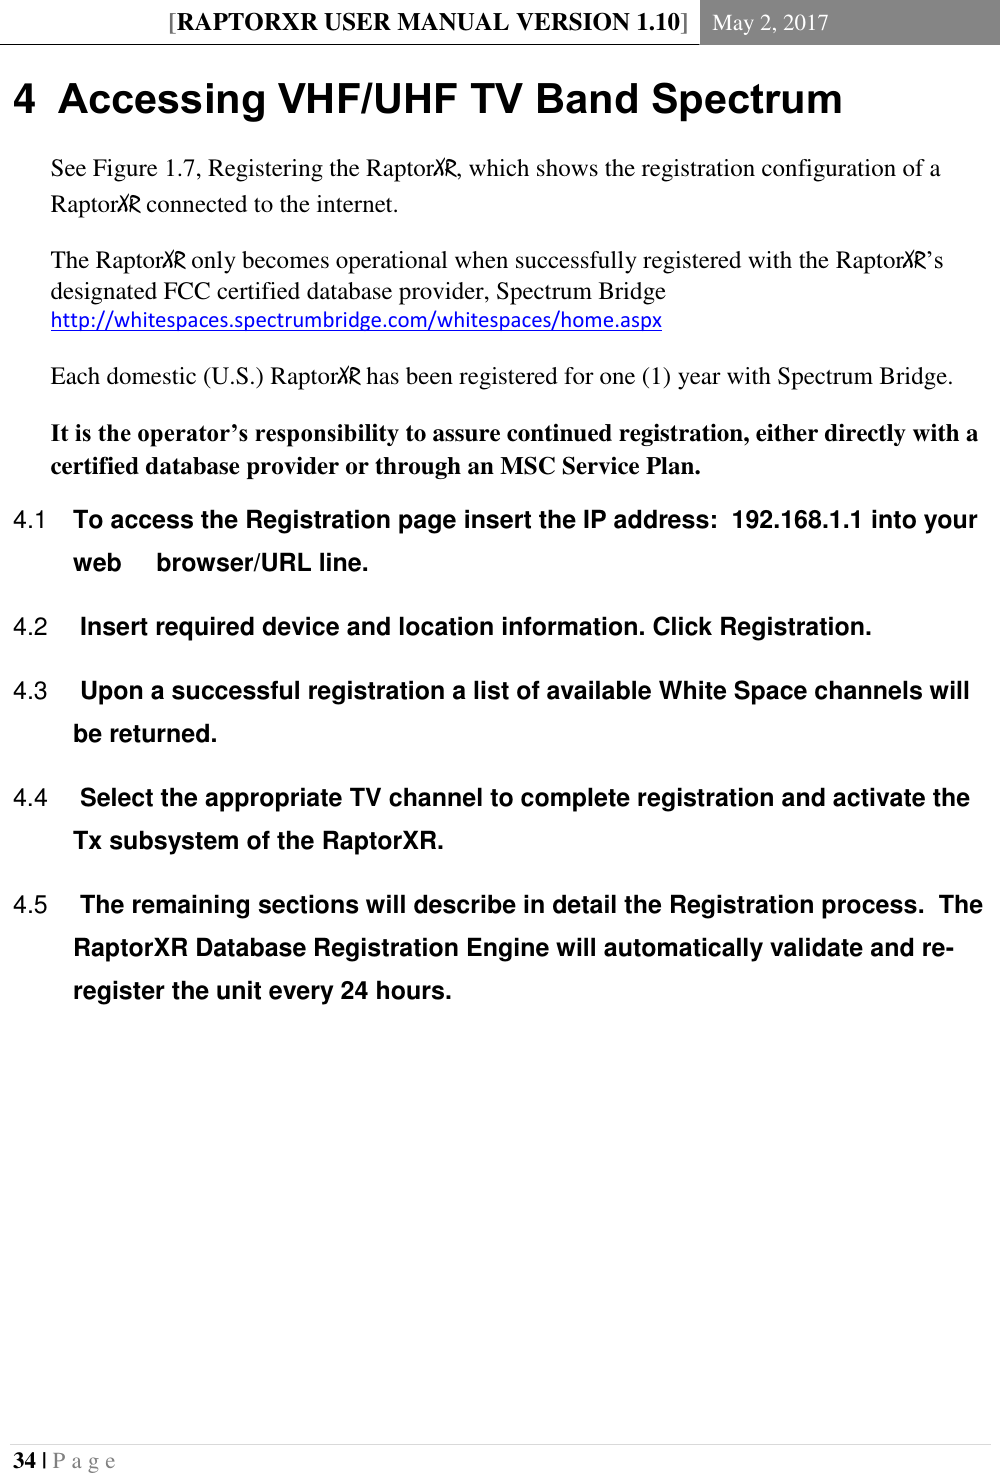 [RAPTORXR USER MANUAL VERSION 1.10] May 2, 2017  34 | P a g e   4  Accessing VHF/UHF TV Band Spectrum See Figure 1.7, Registering the RaptorXR, which shows the registration configuration of a RaptorXR connected to the internet. The RaptorXR only becomes operational when successfully registered with the RaptorXR’s designated FCC certified database provider, Spectrum Bridge http://whitespaces.spectrumbridge.com/whitespaces/home.aspx  Each domestic (U.S.) RaptorXR has been registered for one (1) year with Spectrum Bridge.  It is the operator’s responsibility to assure continued registration, either directly with a certified database provider or through an MSC Service Plan.  To access the Registration page insert the IP address:  192.168.1.1 into your 4.1web     browser/URL line.   Insert required device and location information. Click Registration. 4.2  Upon a successful registration a list of available White Space channels will 4.3be returned.    Select the appropriate TV channel to complete registration and activate the 4.4Tx subsystem of the RaptorXR.     The remaining sections will describe in detail the Registration process.  The 4.5RaptorXR Database Registration Engine will automatically validate and re-register the unit every 24 hours.     